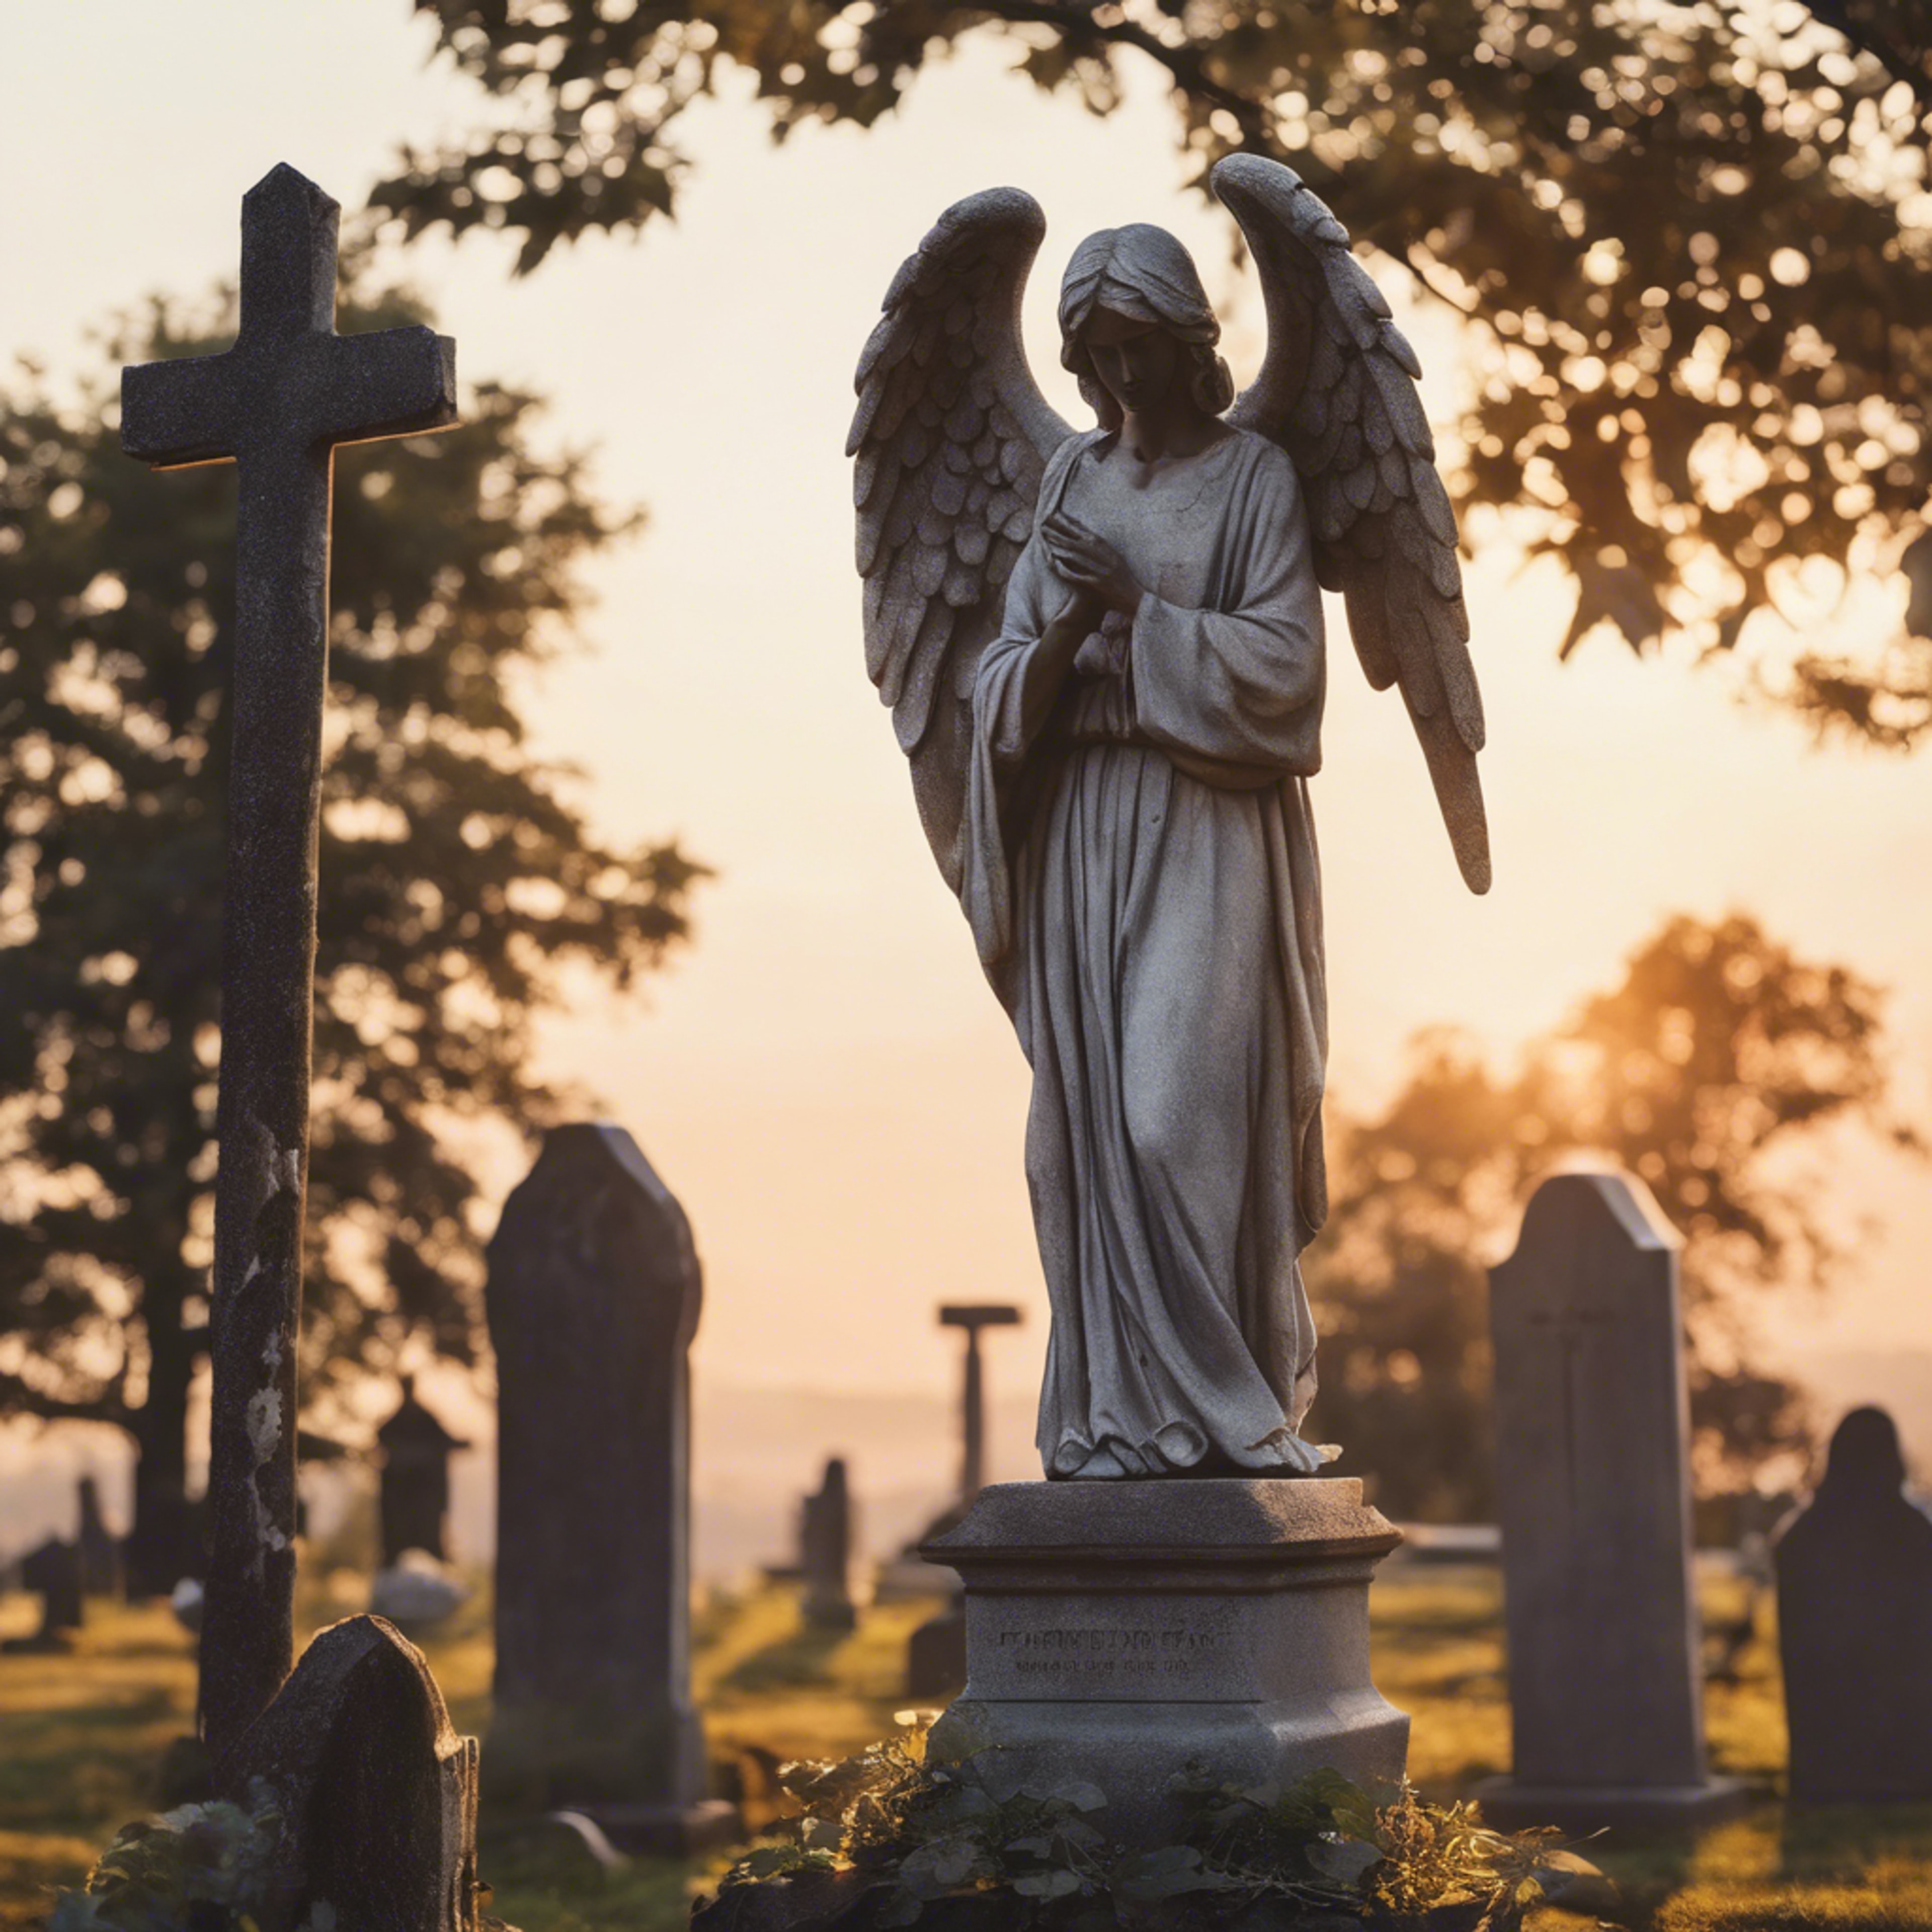 A peaceful graveyard scene with a stone angel statue guarding over the resting place under a serene sunset. Tapet[5f1d382335d645bc8b2f]